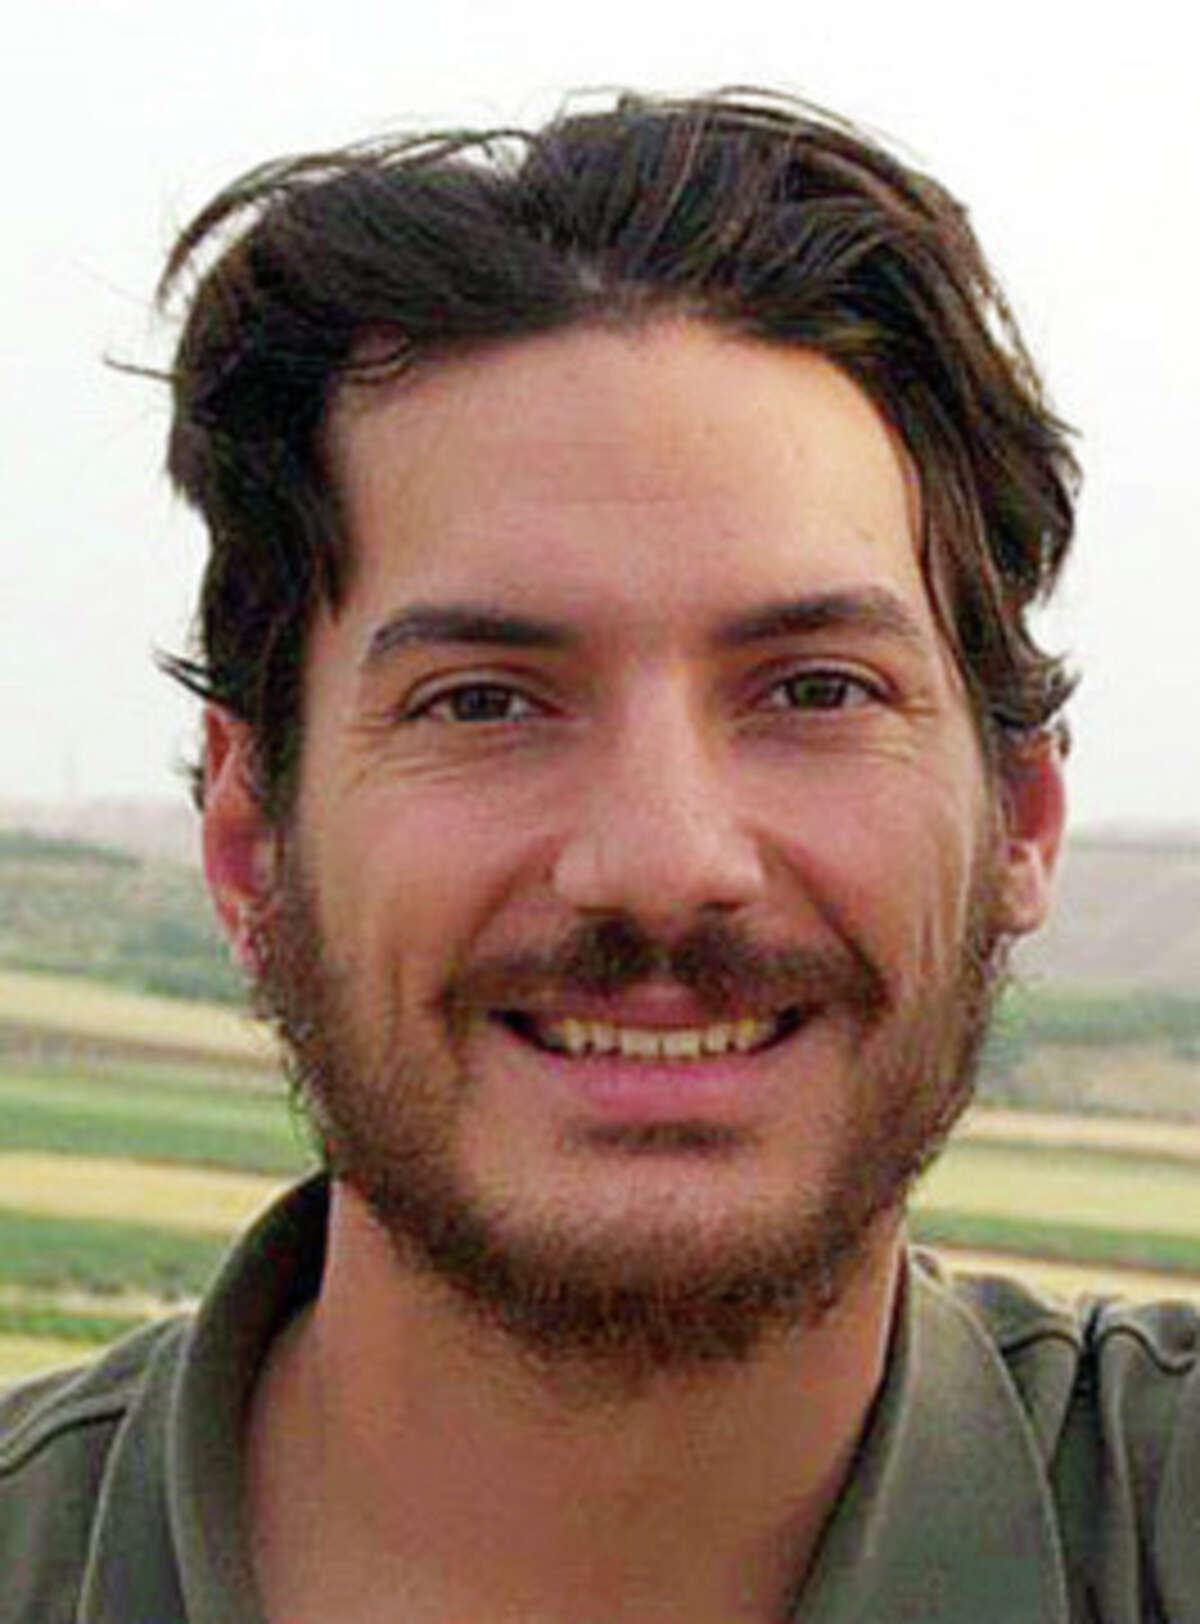 Austin Tice, a freelance journalist for McClatchy and other news outlets, has vanished in Syria. Tice was last heard from in mid-August 2012. (Courtesy of Tice family/MCT)